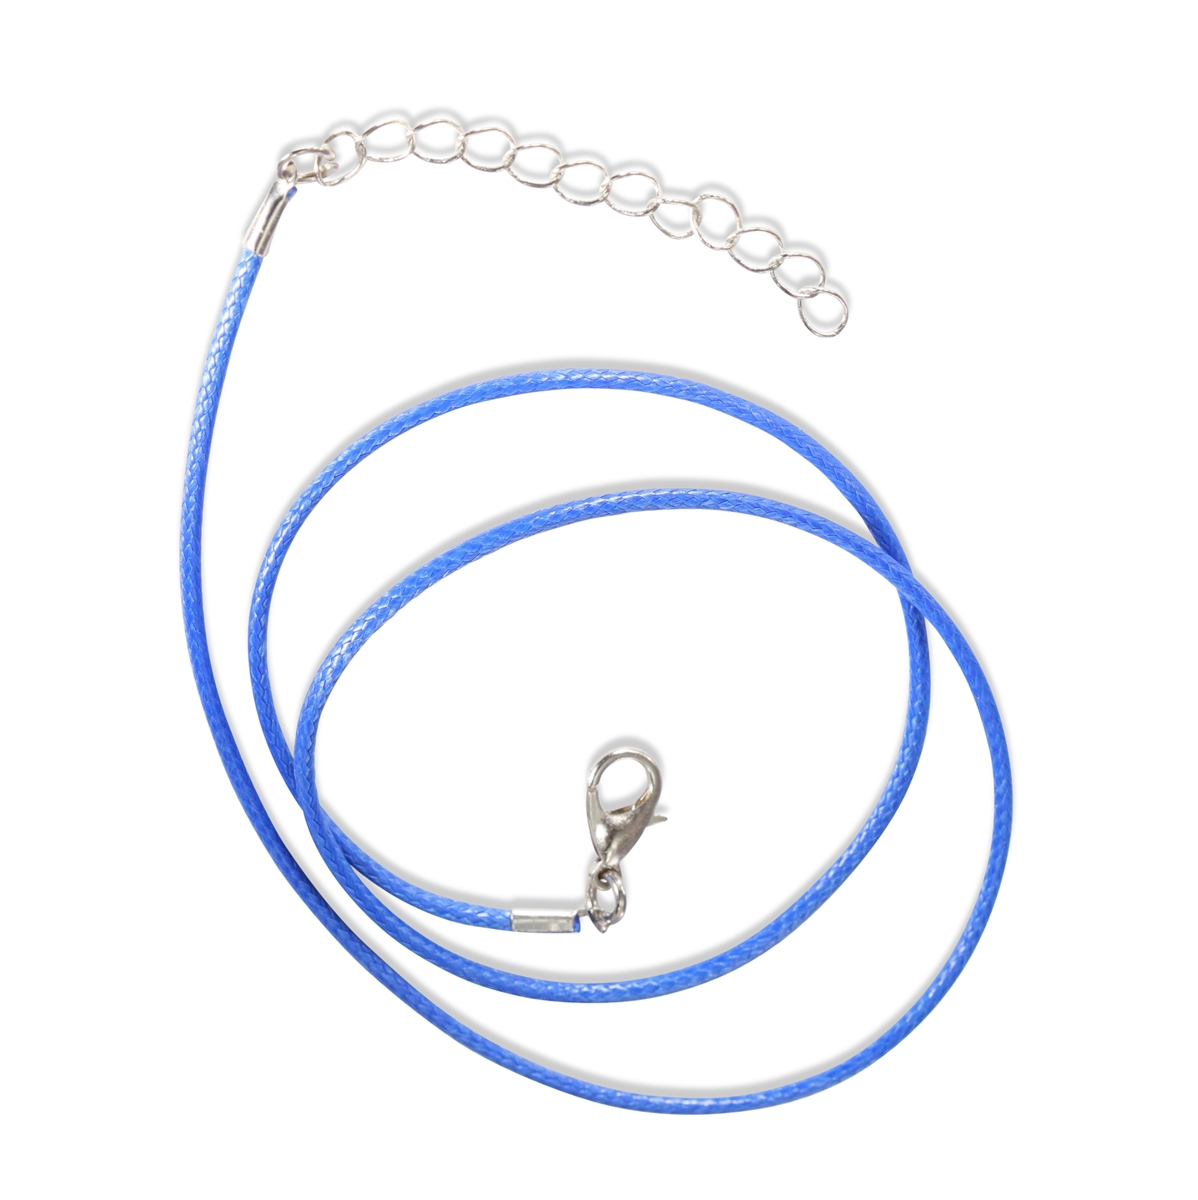 Necklace - Waxed Cotton Cord - Electric Blue